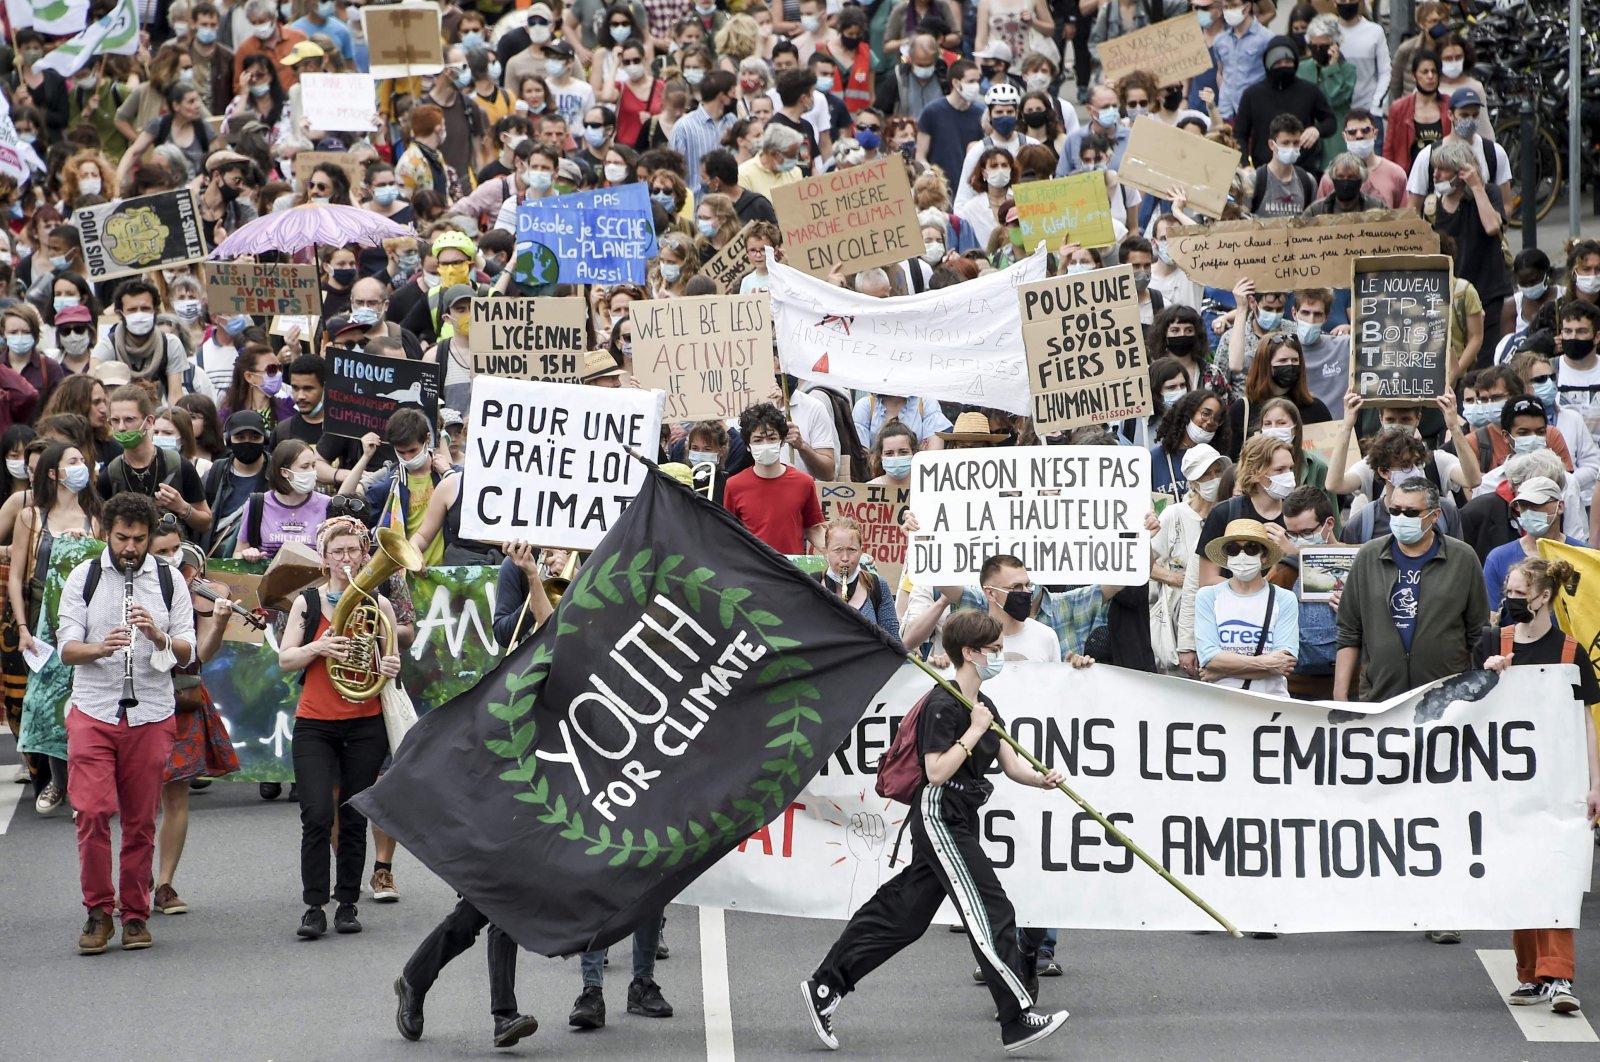 A demonstrator holds a flag reading "Youth for Climate" during a "march for climate" called by several NGOs and unions as part of a national day of action to demand climate justice in Nantes, western France, May 9, 2021. (AFP Photo)